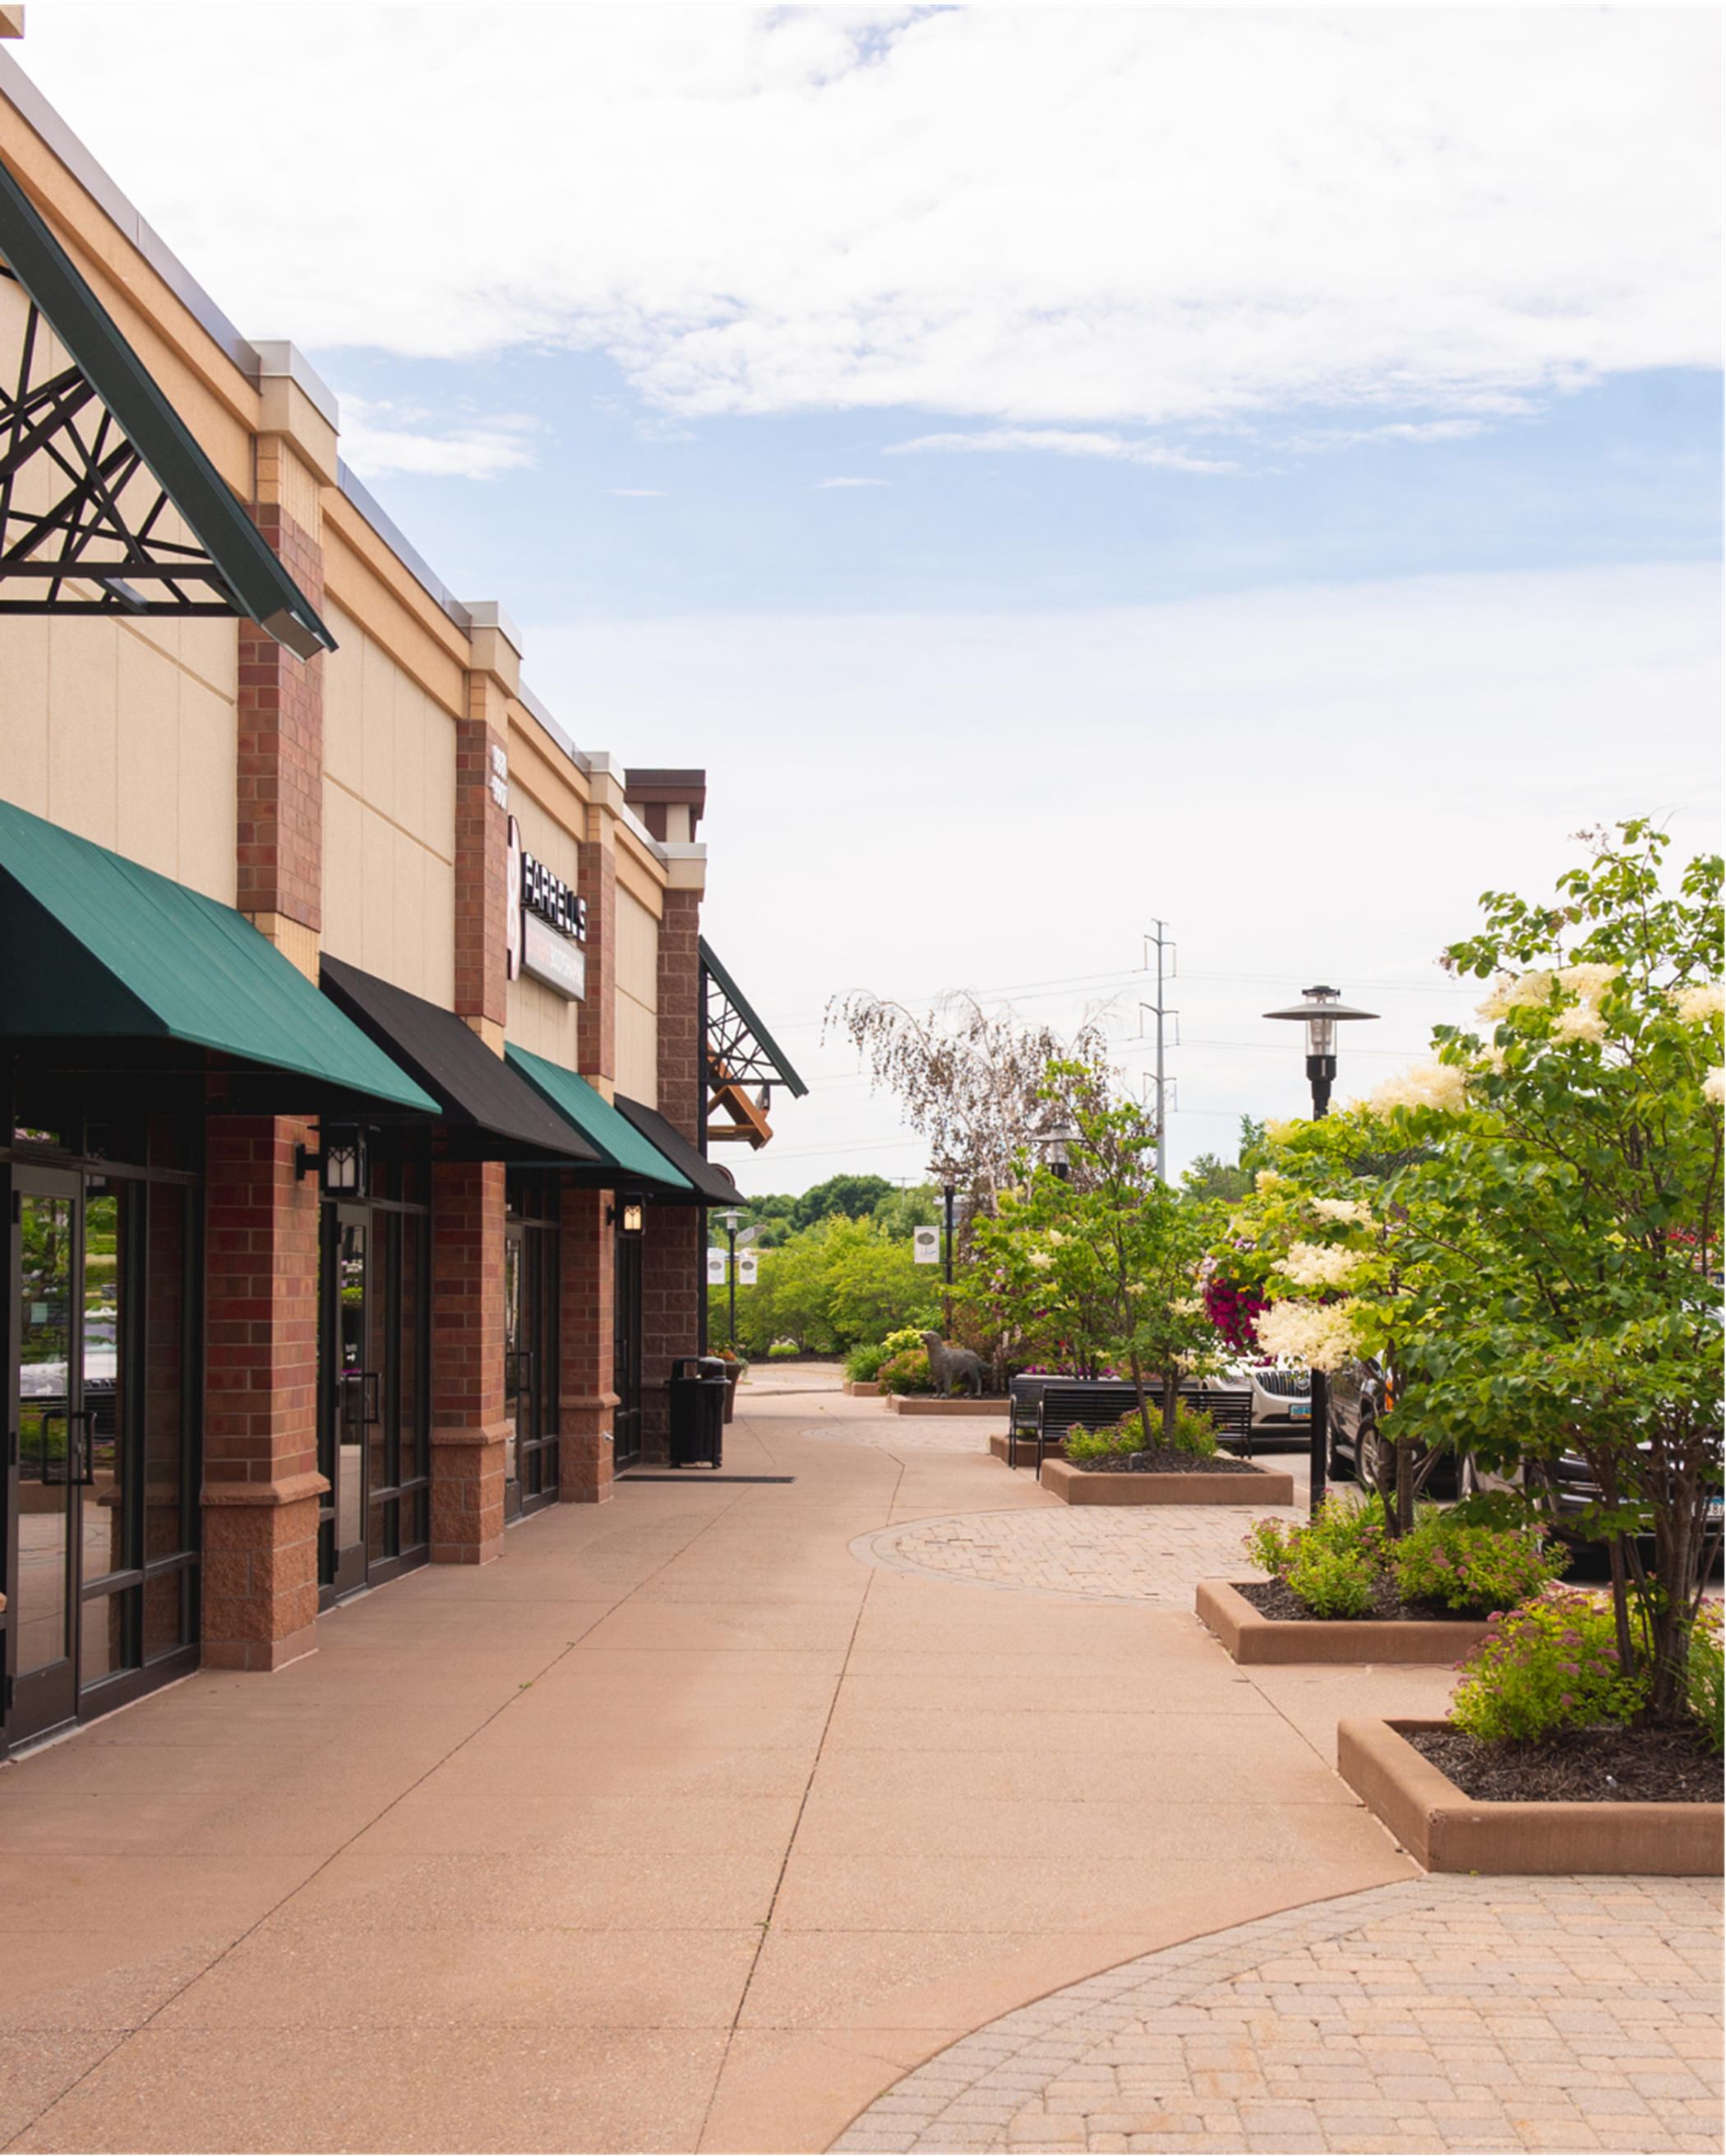 Shoppes for dining and retail